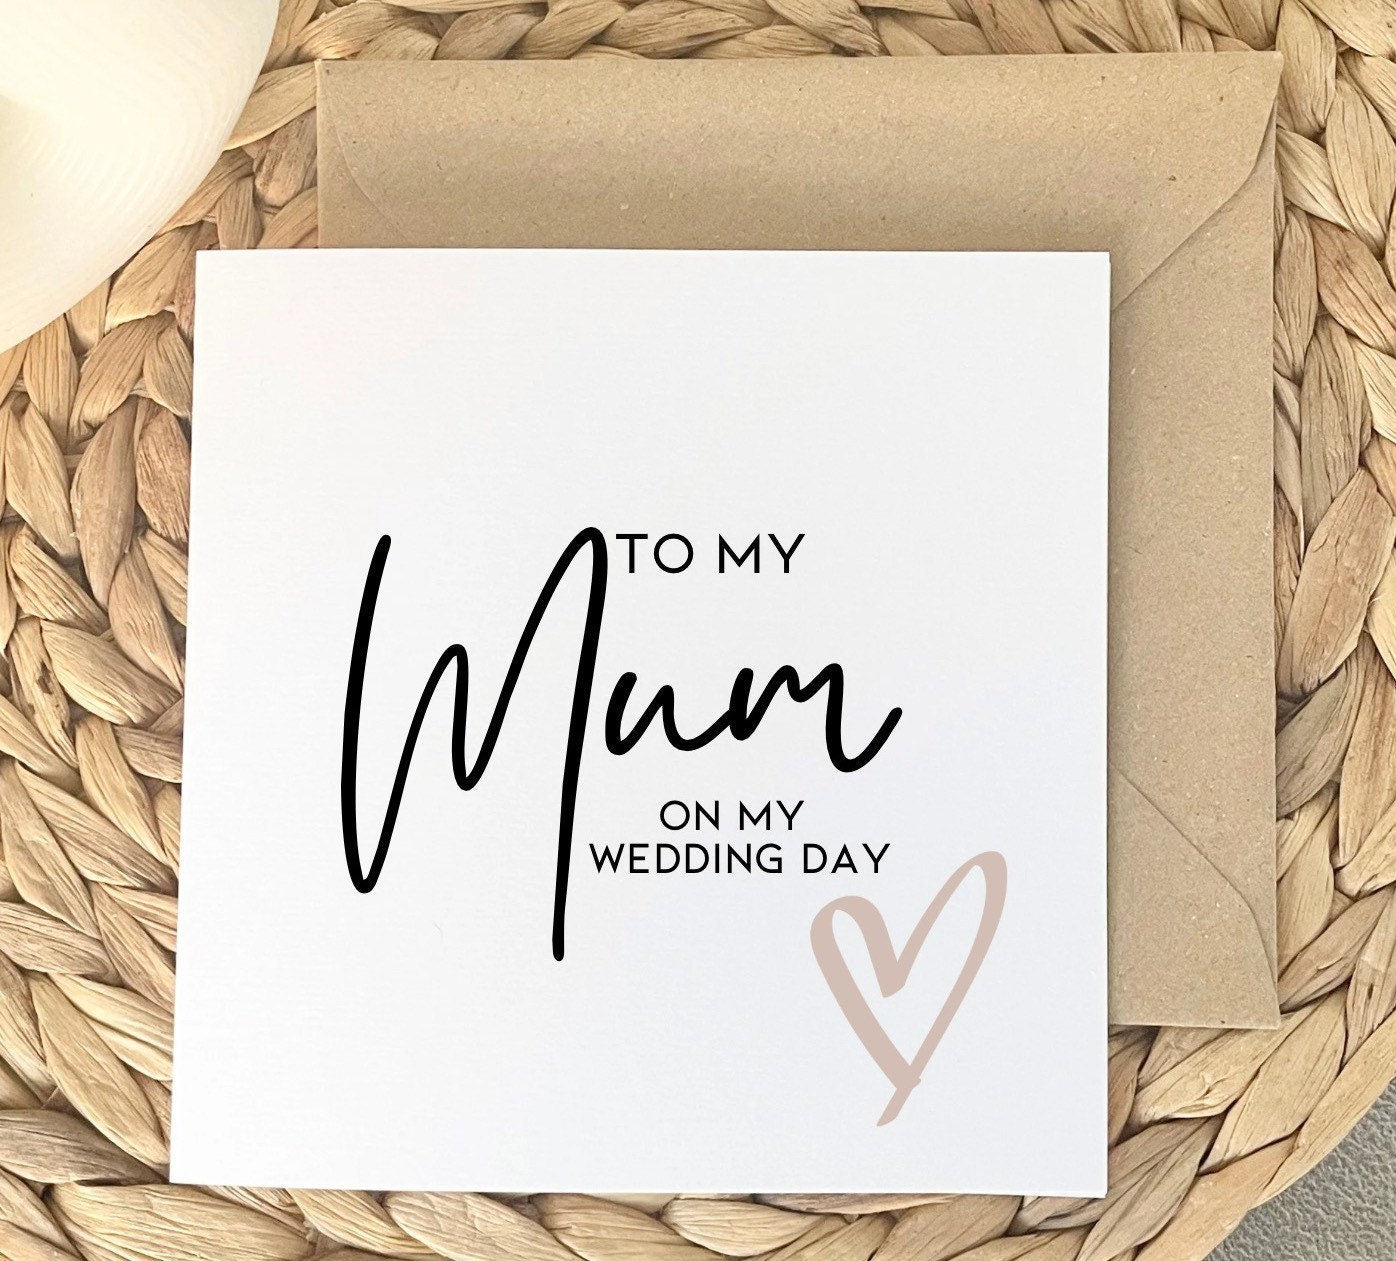 To my mum on my wedding day card to say thank you for walking me down aisle, cards from the bride to her mum, grooms mother card